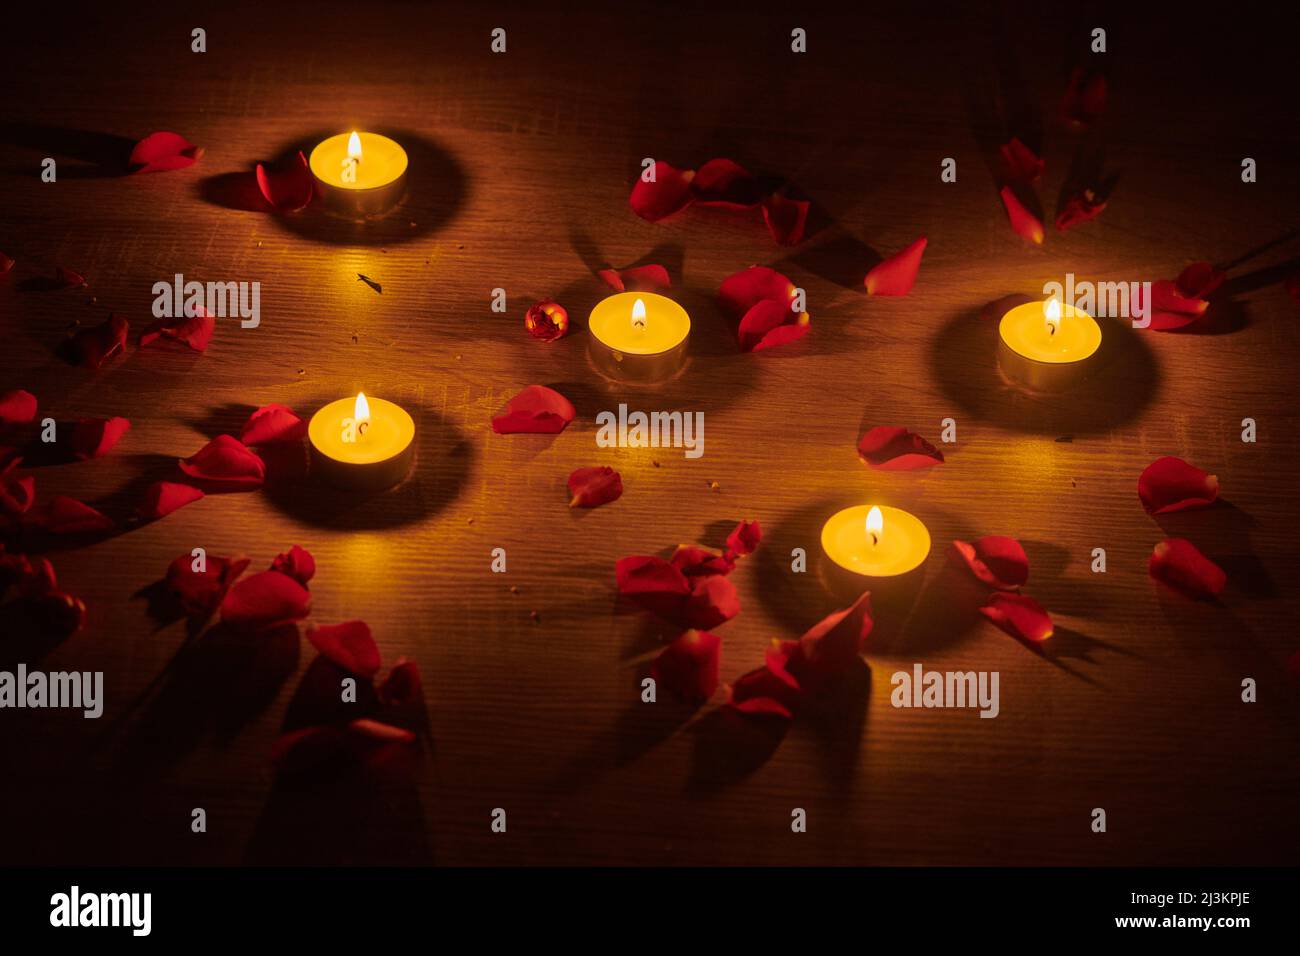 Illuminated tealight candles and red rose petals scattered on a surface create a romantic setting; Studio Stock Photo